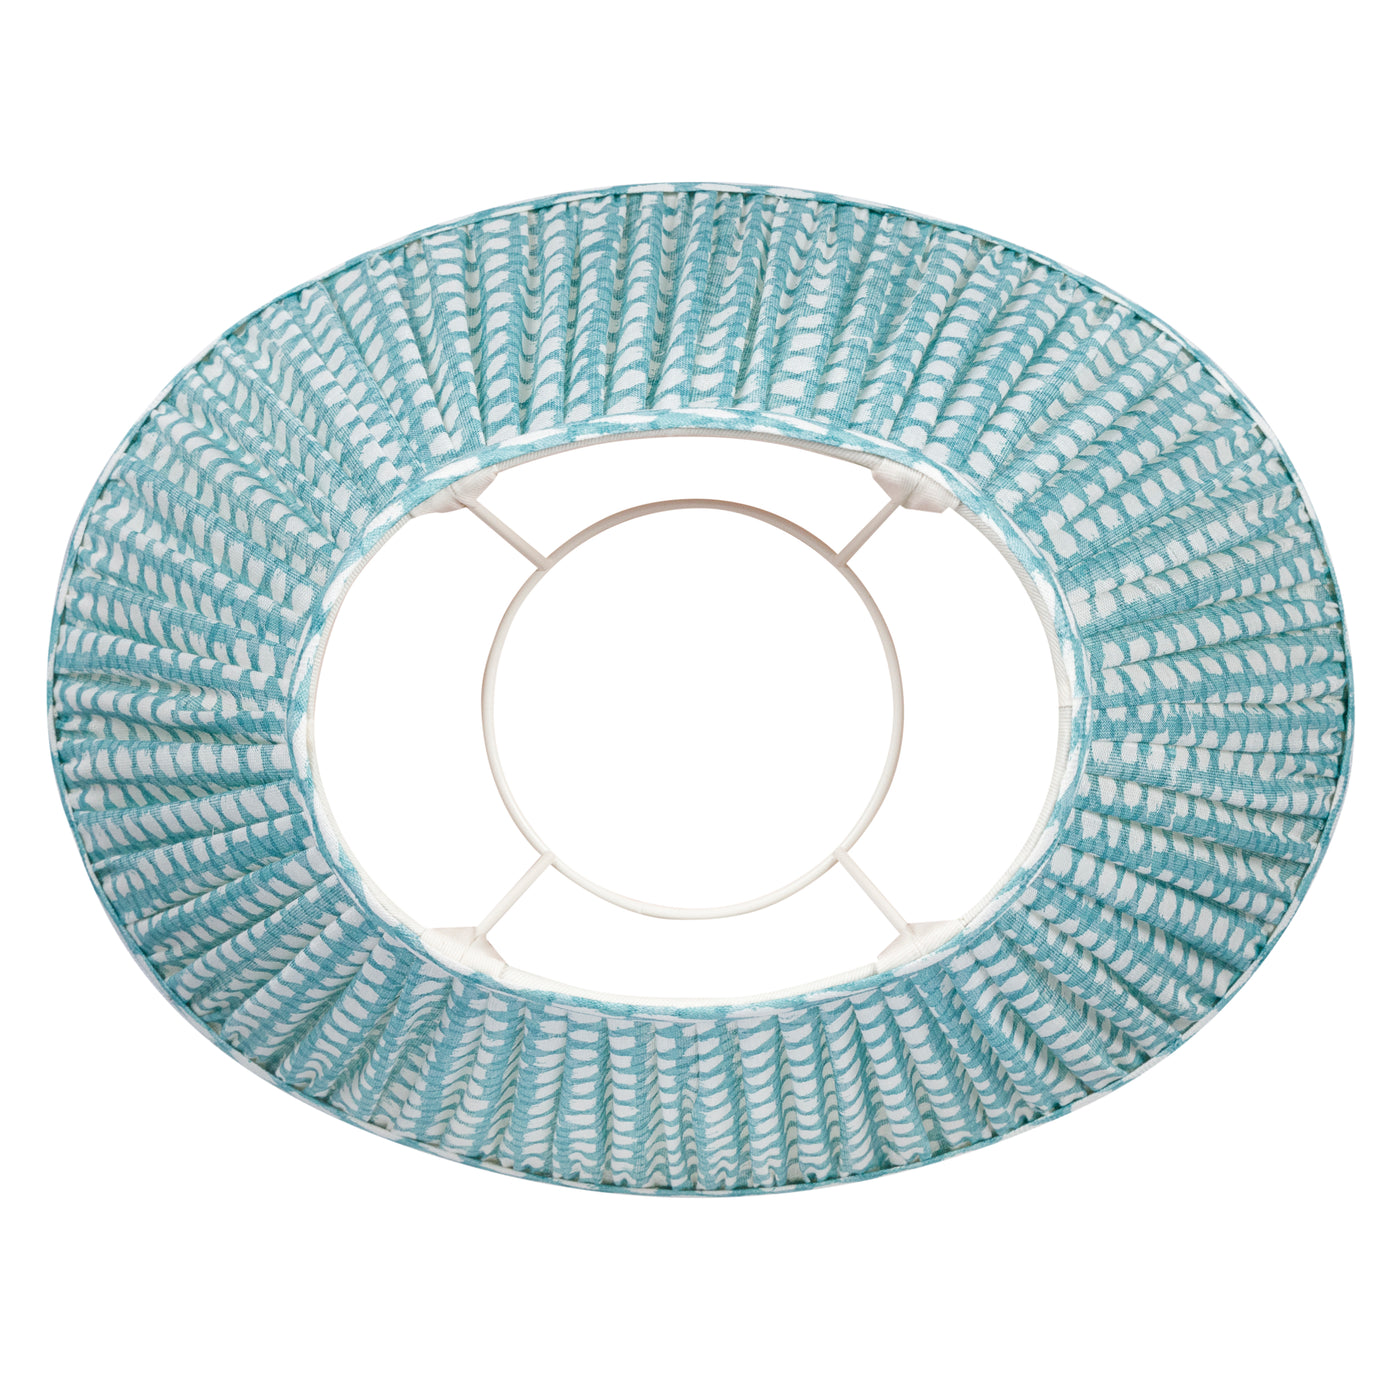 Oval Fermoie Lampshade - Wicker in Turquoise | Newport Lamp And Shade | Located in Newport, RI